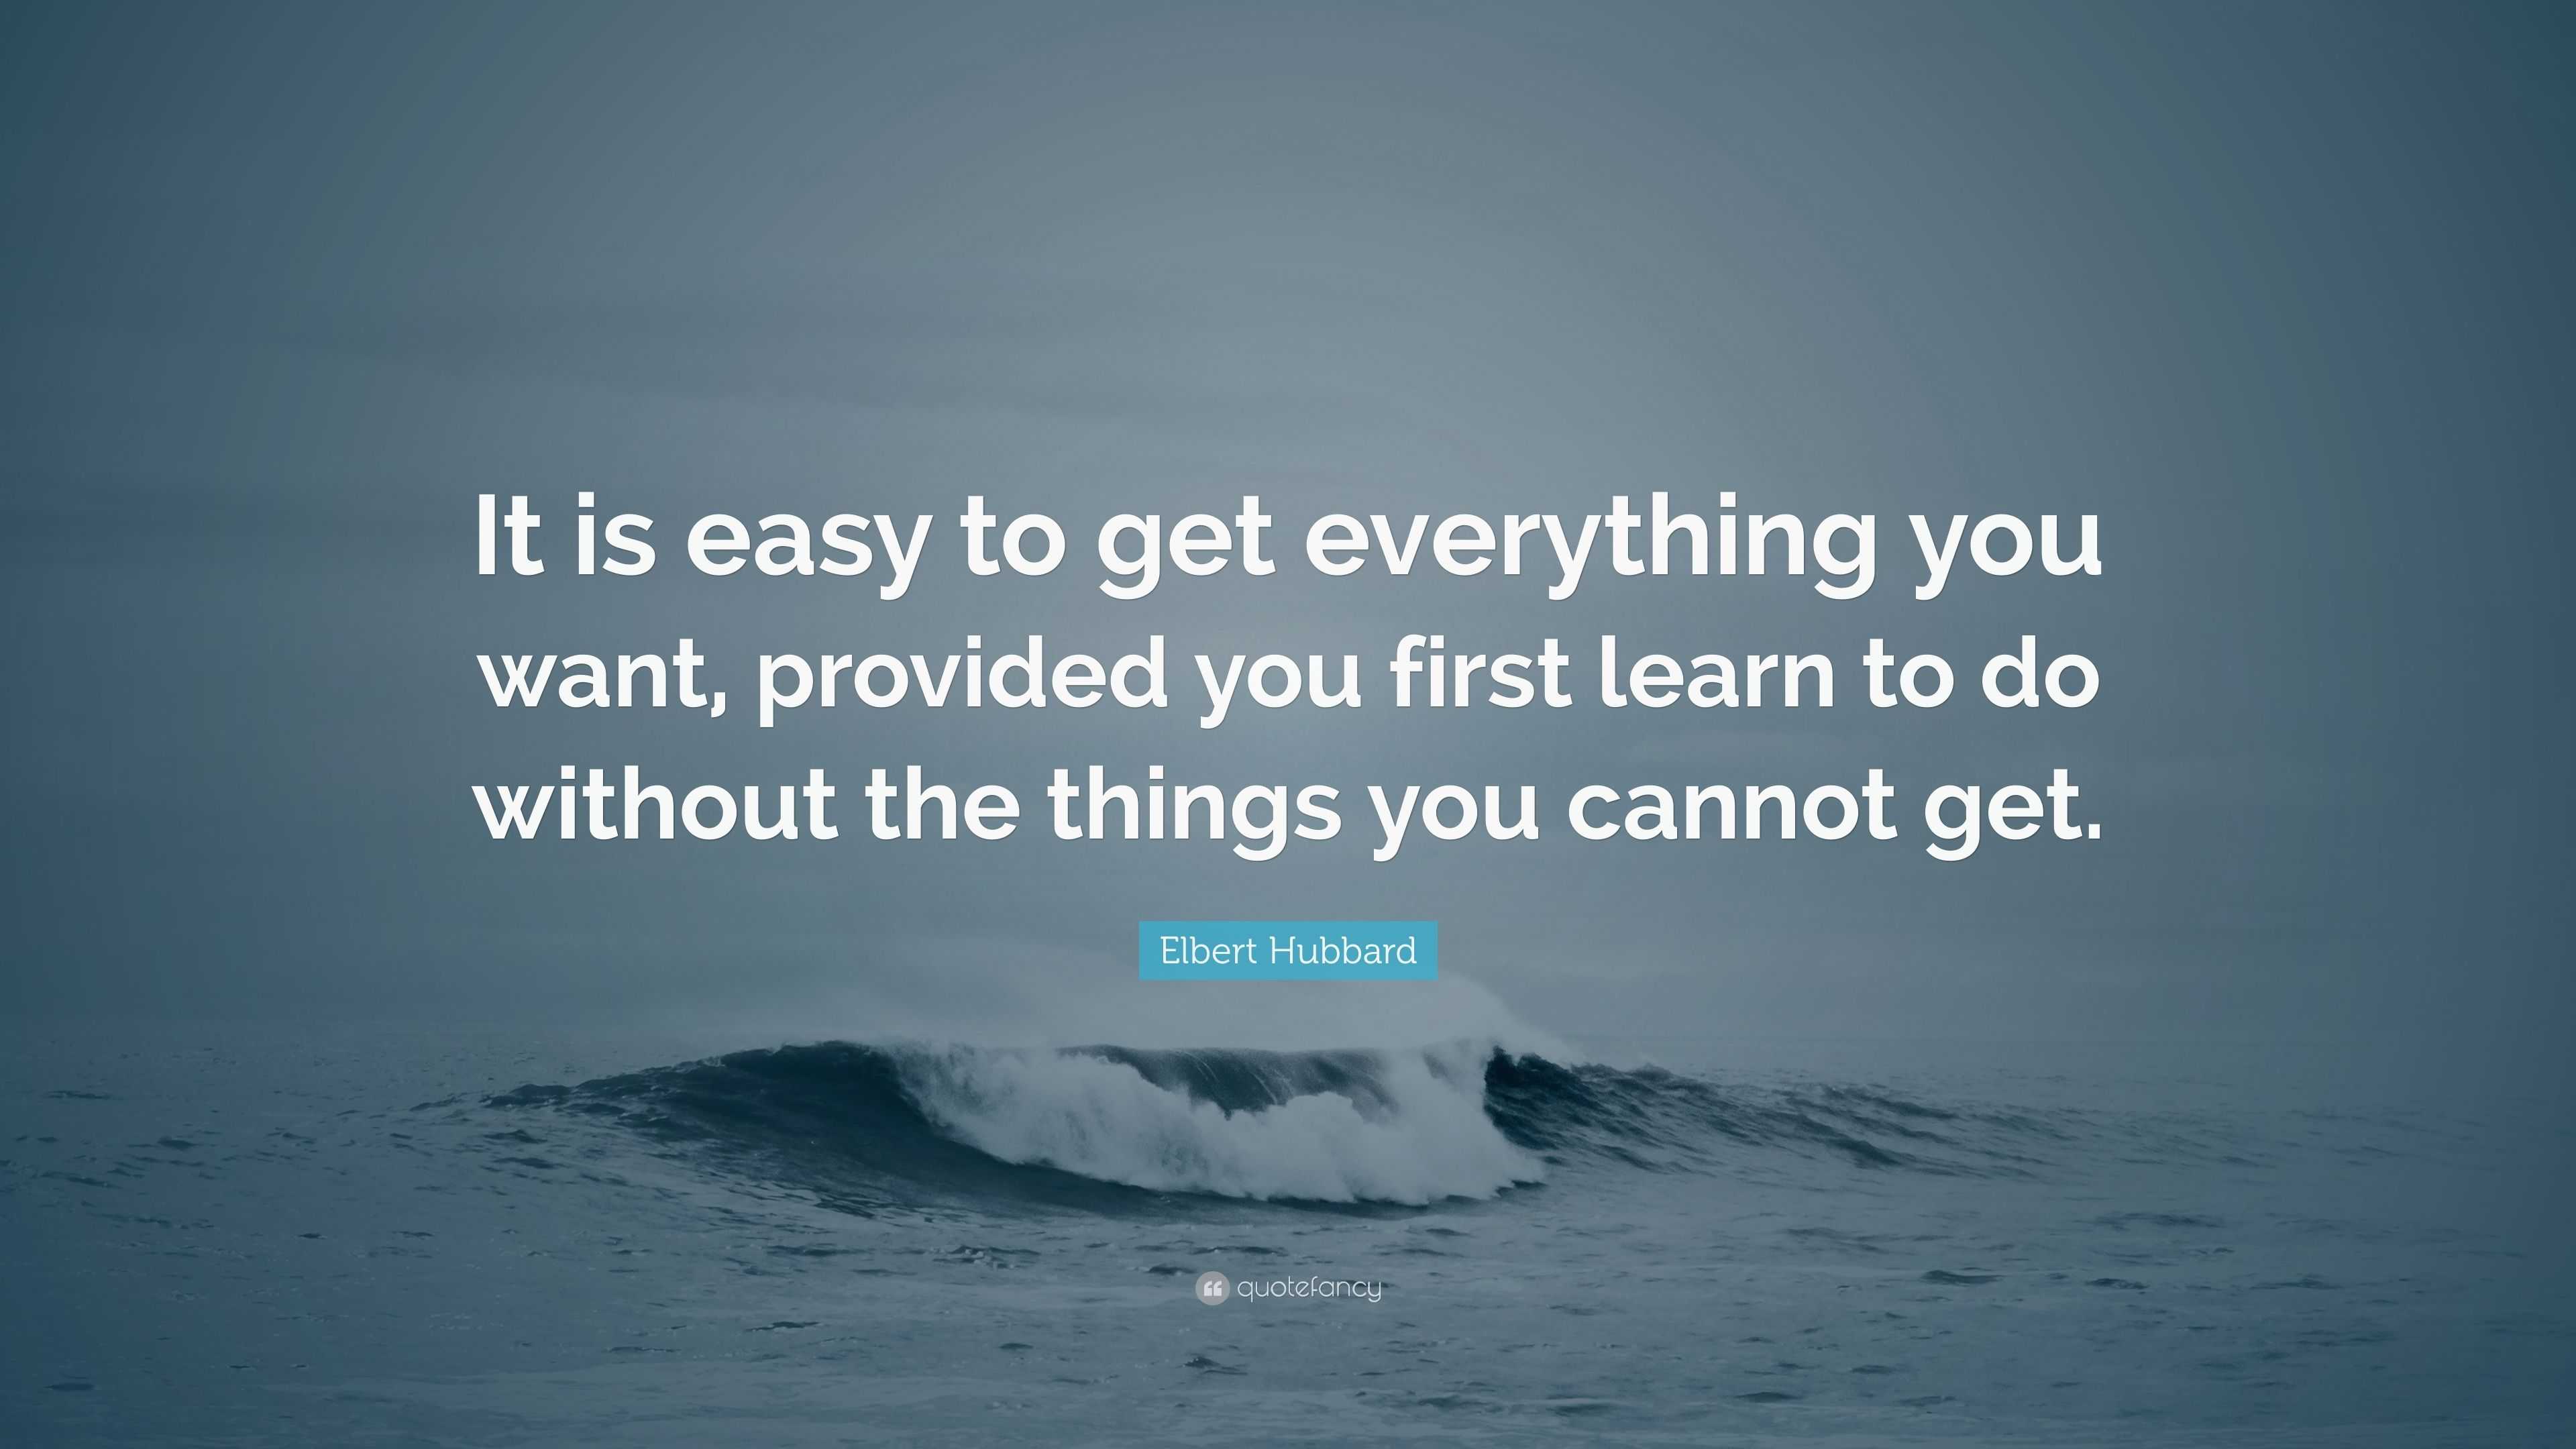 Elbert Hubbard Quote “it Is Easy To Get Everything You Want Provided